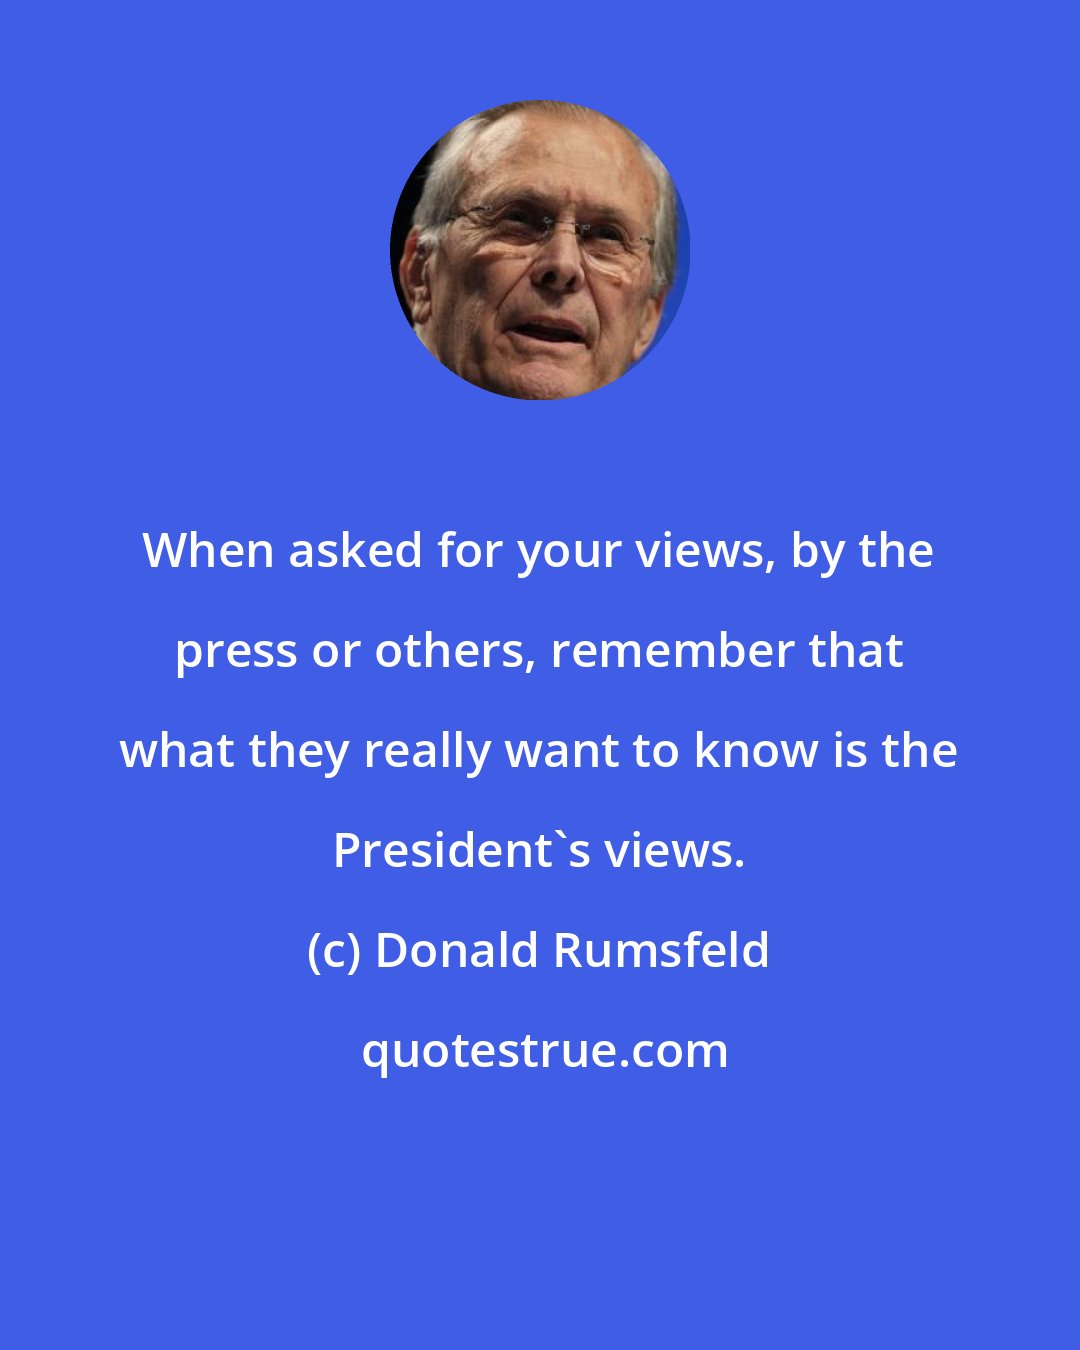 Donald Rumsfeld: When asked for your views, by the press or others, remember that what they really want to know is the President's views.